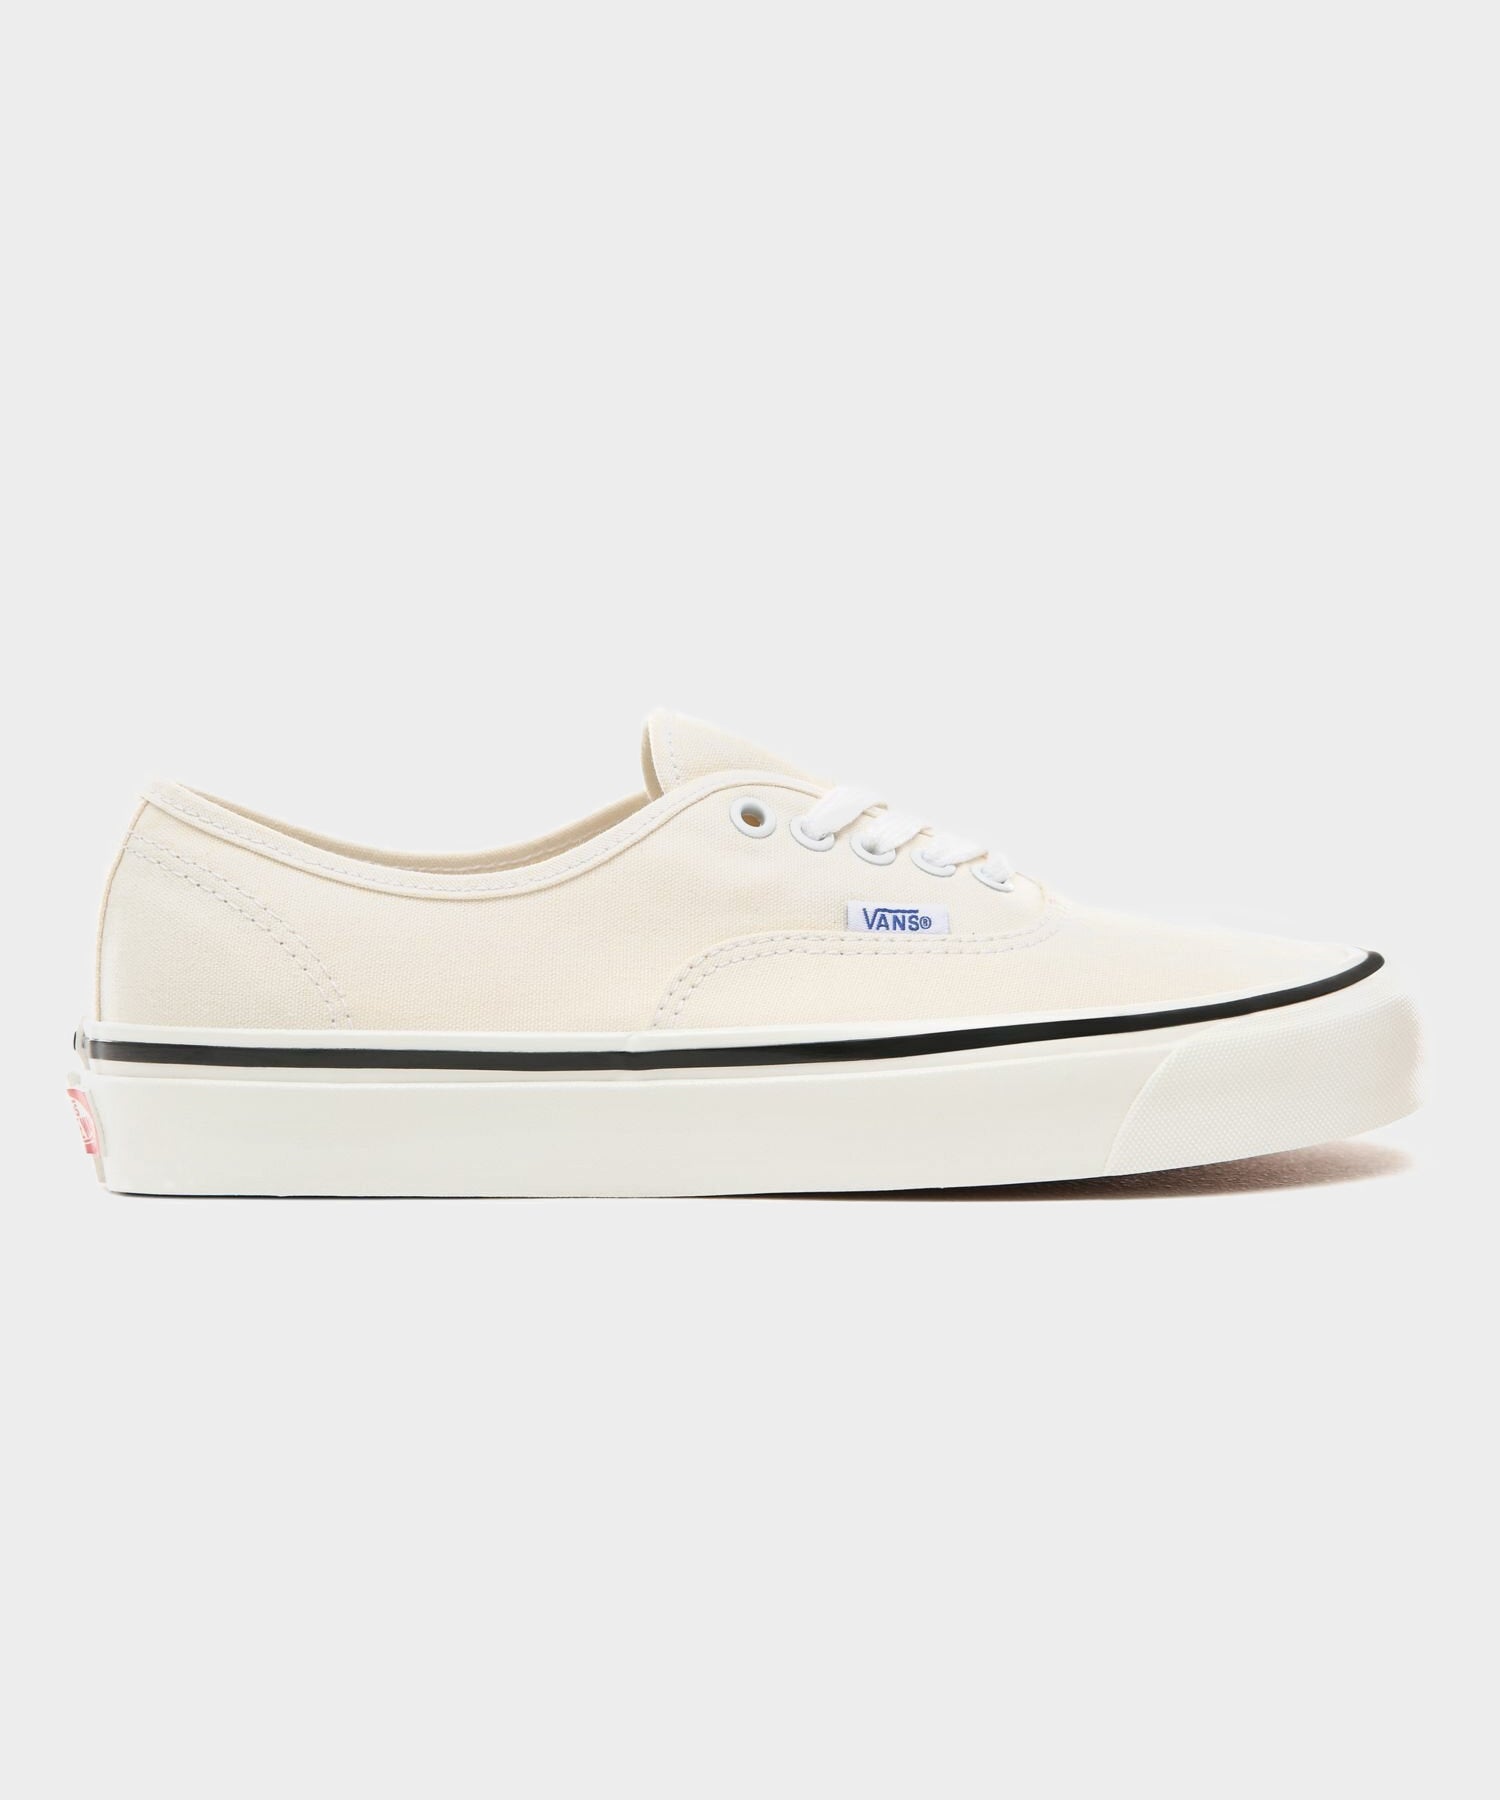 Vans Authentic 44 Anaheim Factory in Classic White